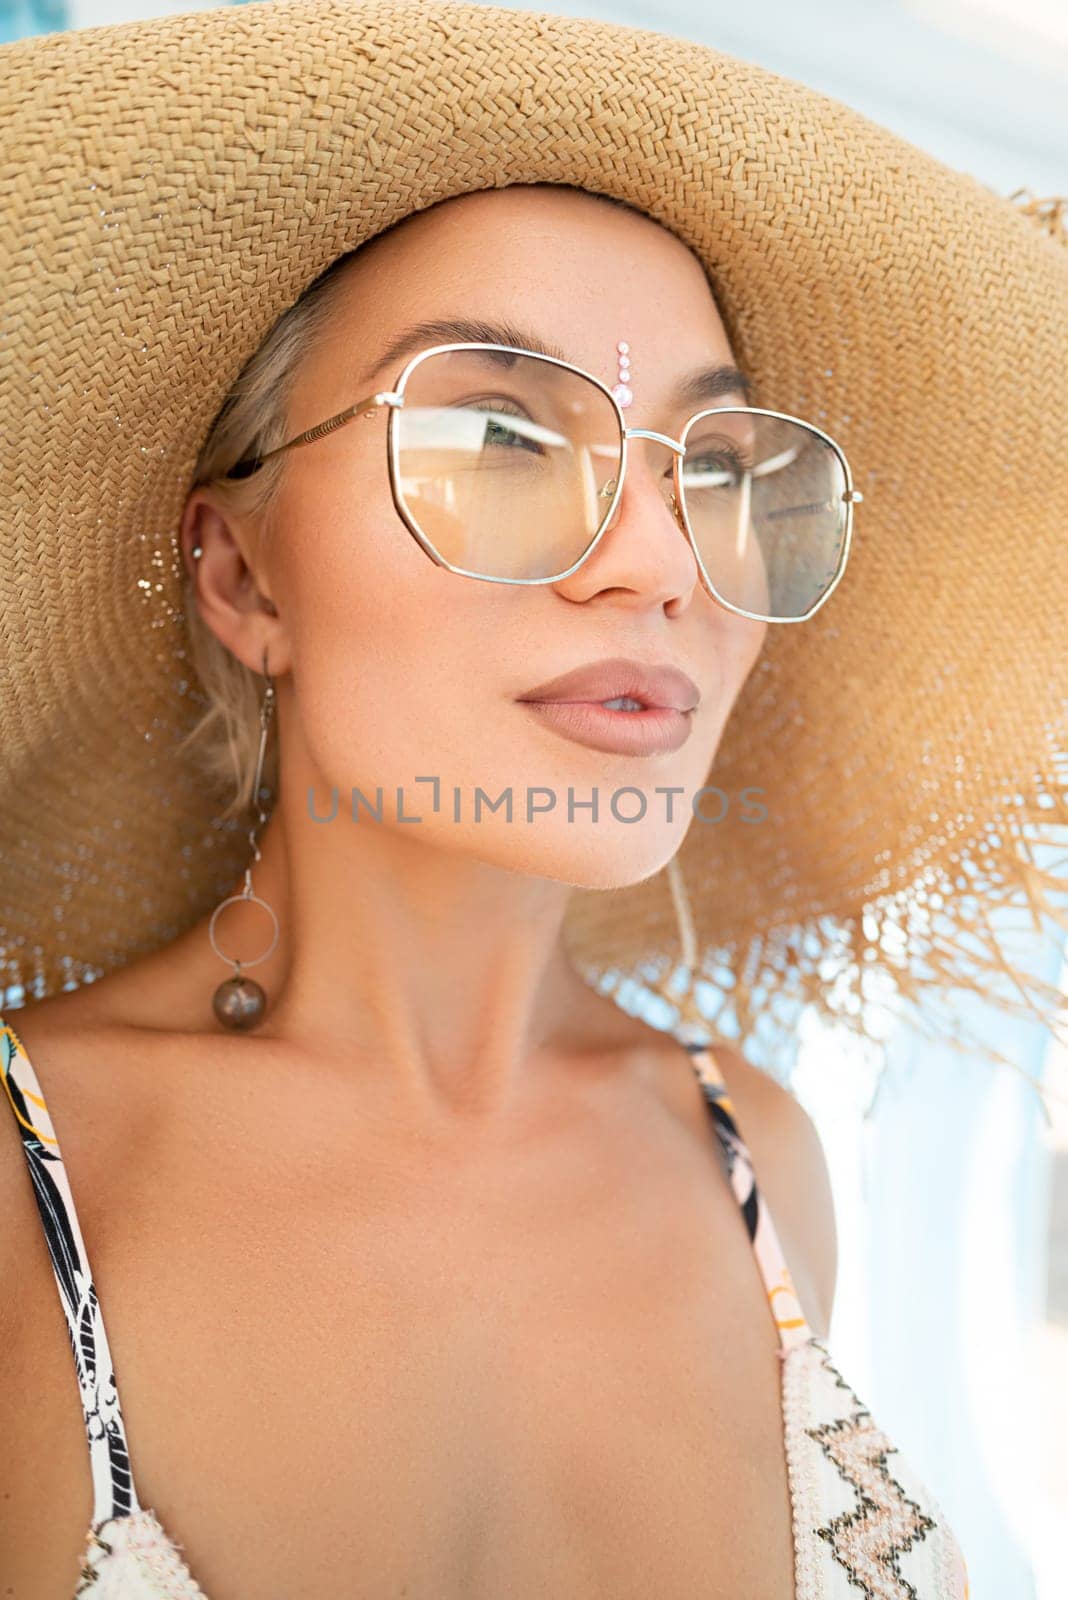 sexy young girl in a straw hat on vacation smiles, gets high and enjoys life in the summer